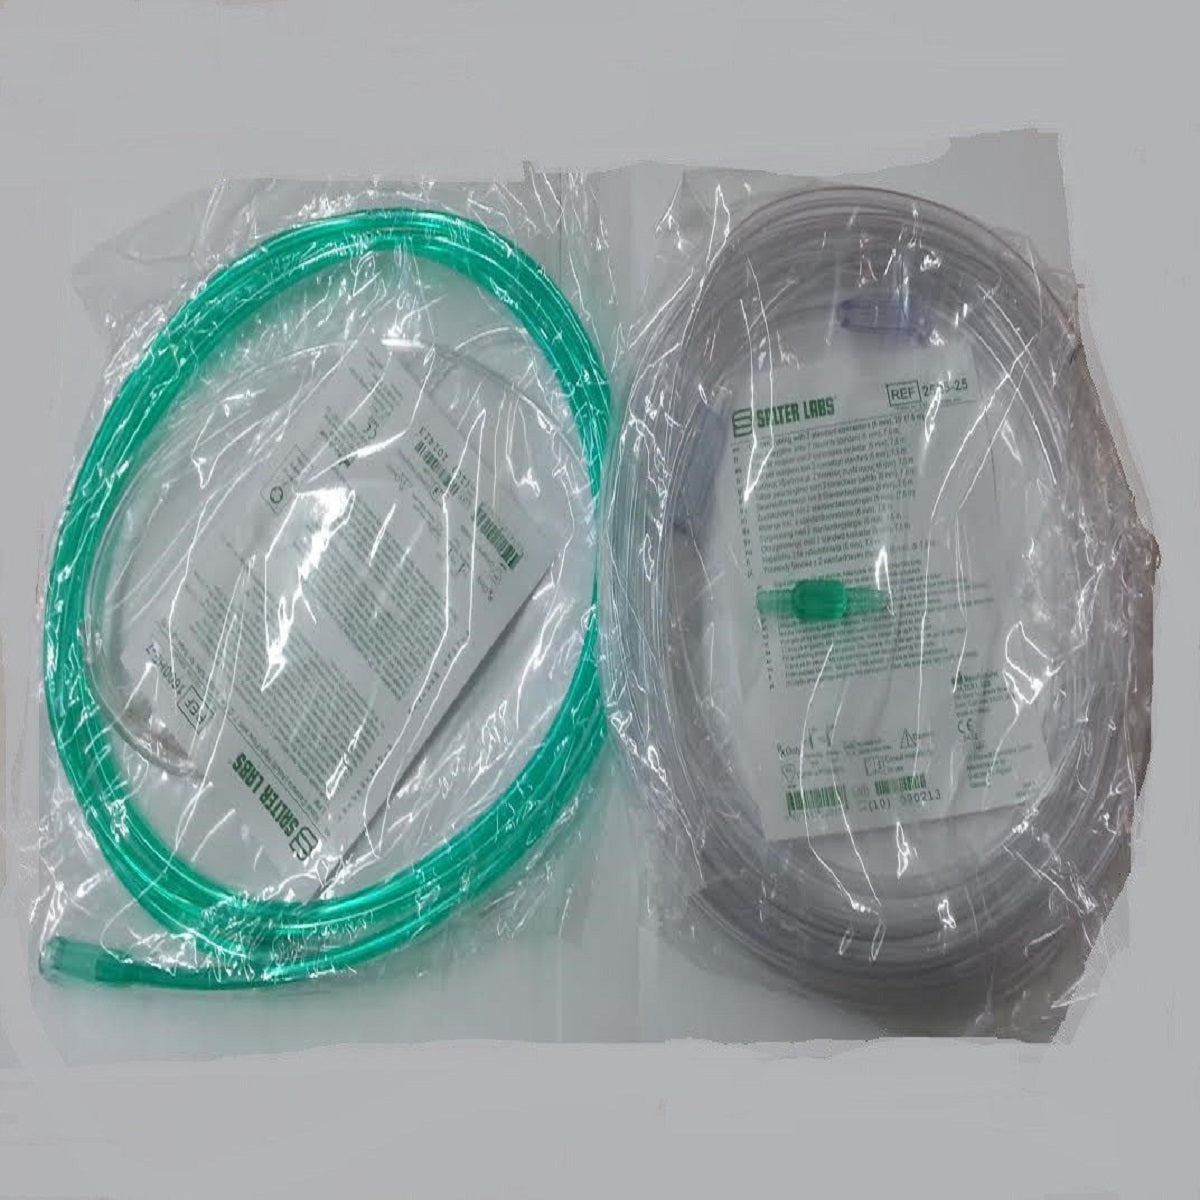 Oxygen Tubing and Medical Supplies  Oxygen Concentrators -  oxygenplusmedical